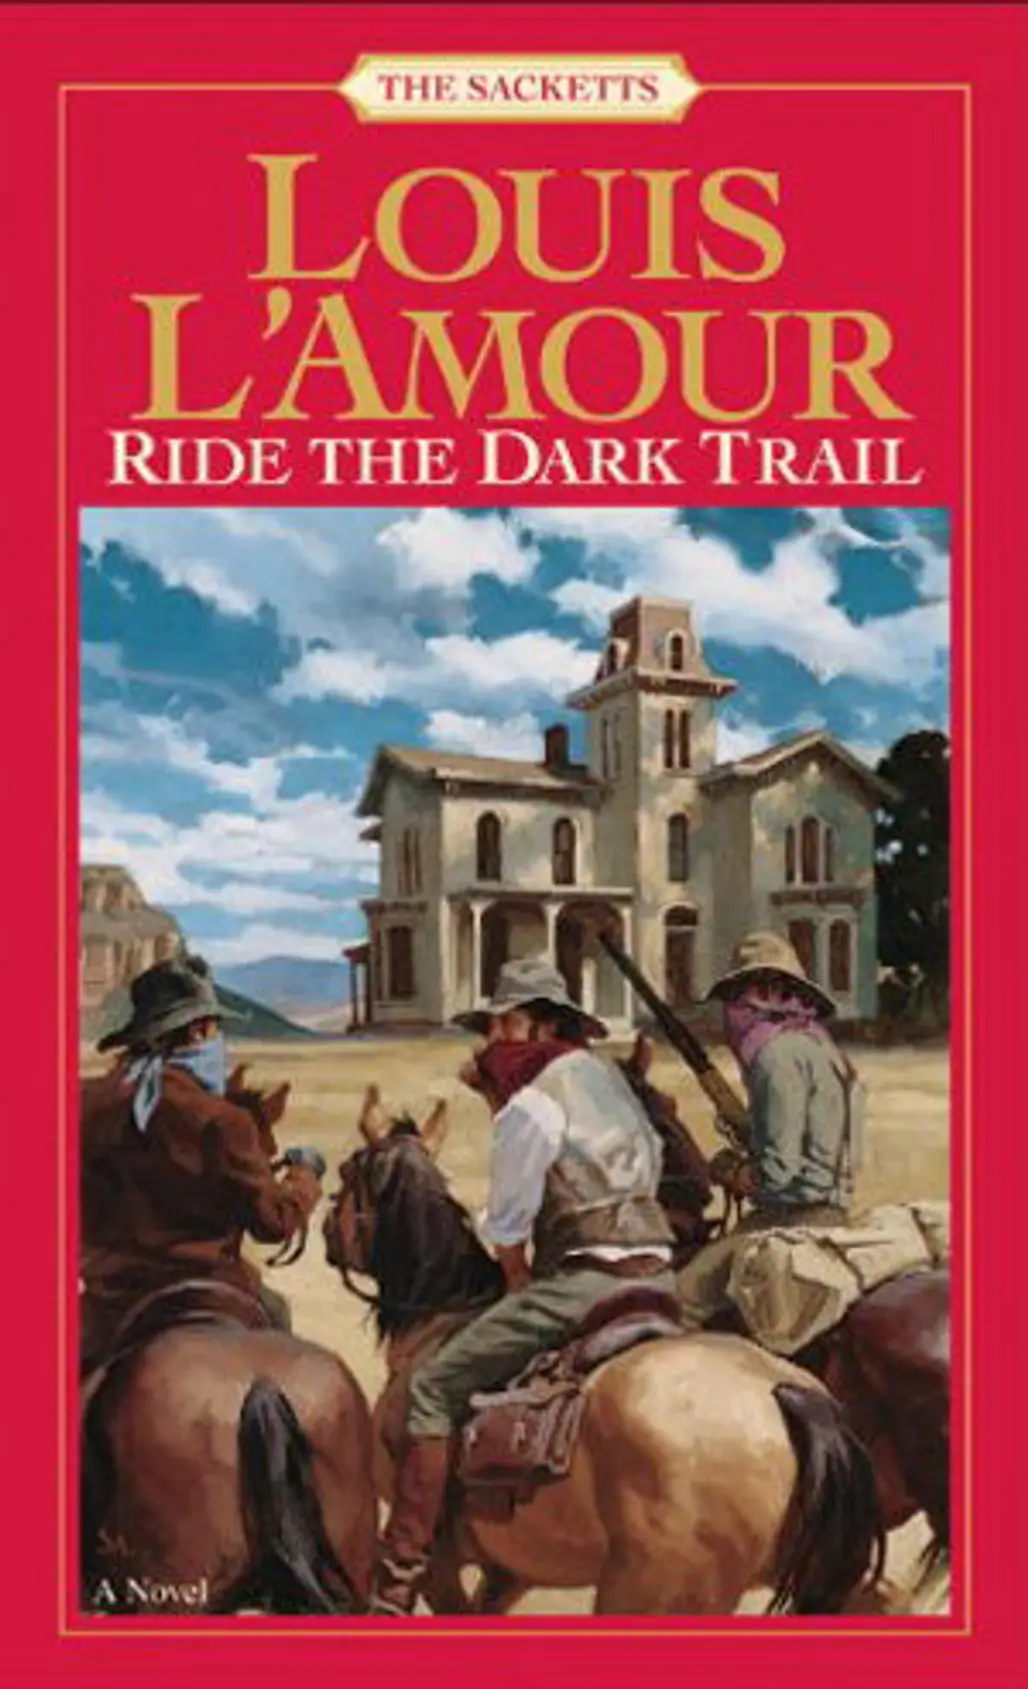 Ride a Dark Trail by Louis L’Amour